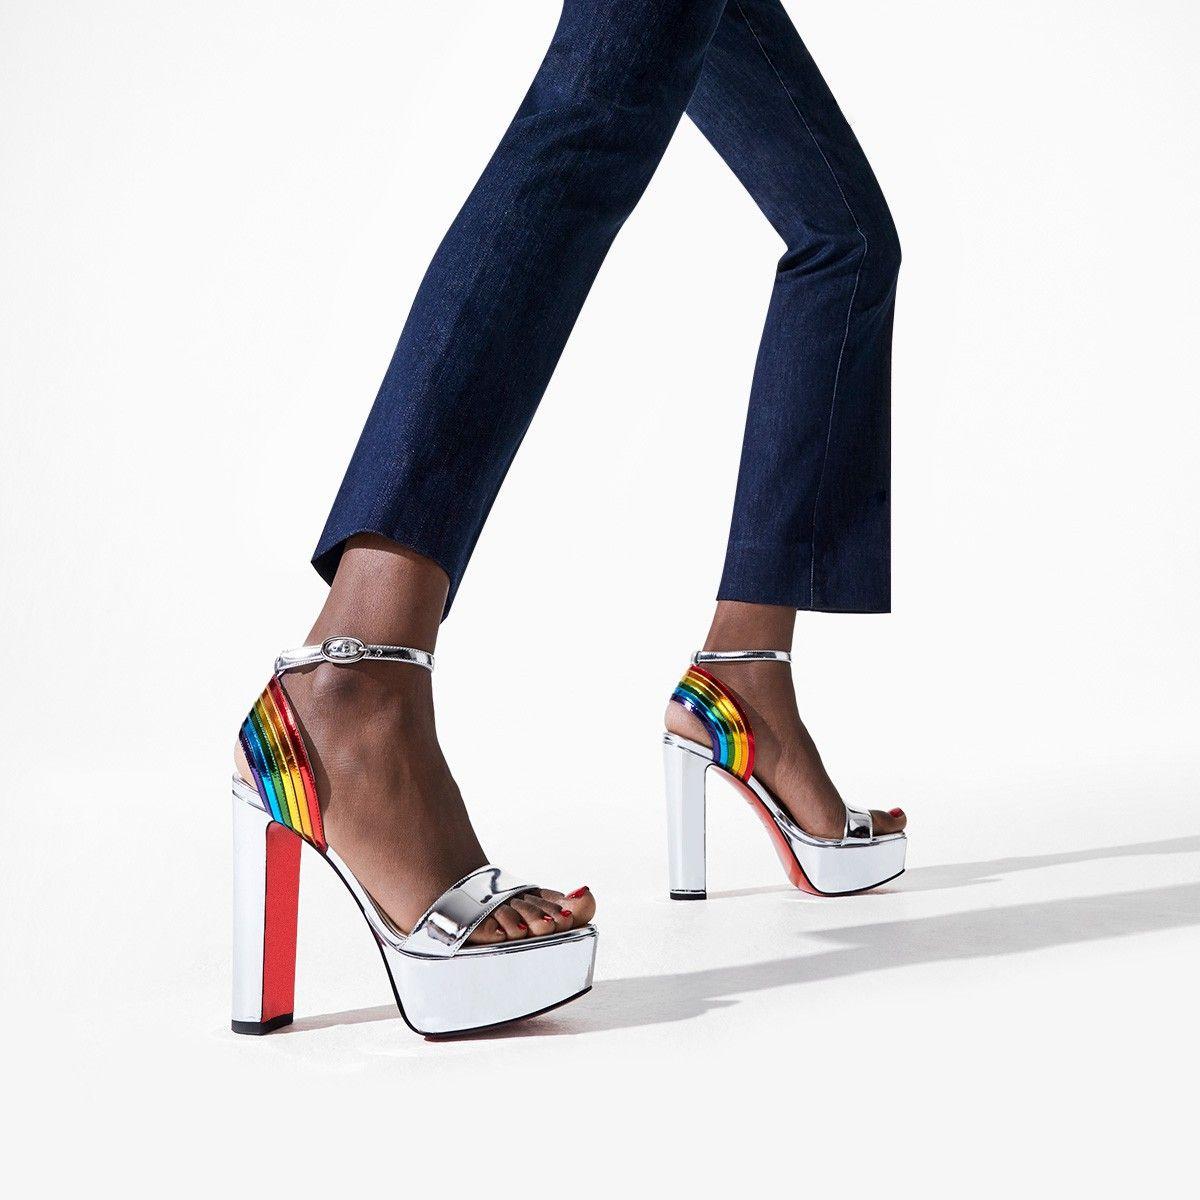 The 'Arkendisc Alta' sandals are made from silver leather and feature a bold rainbow strap. They're set on a dramatic 130mm block heel that's balanced by a 35mm platform and have the signature red soles. 